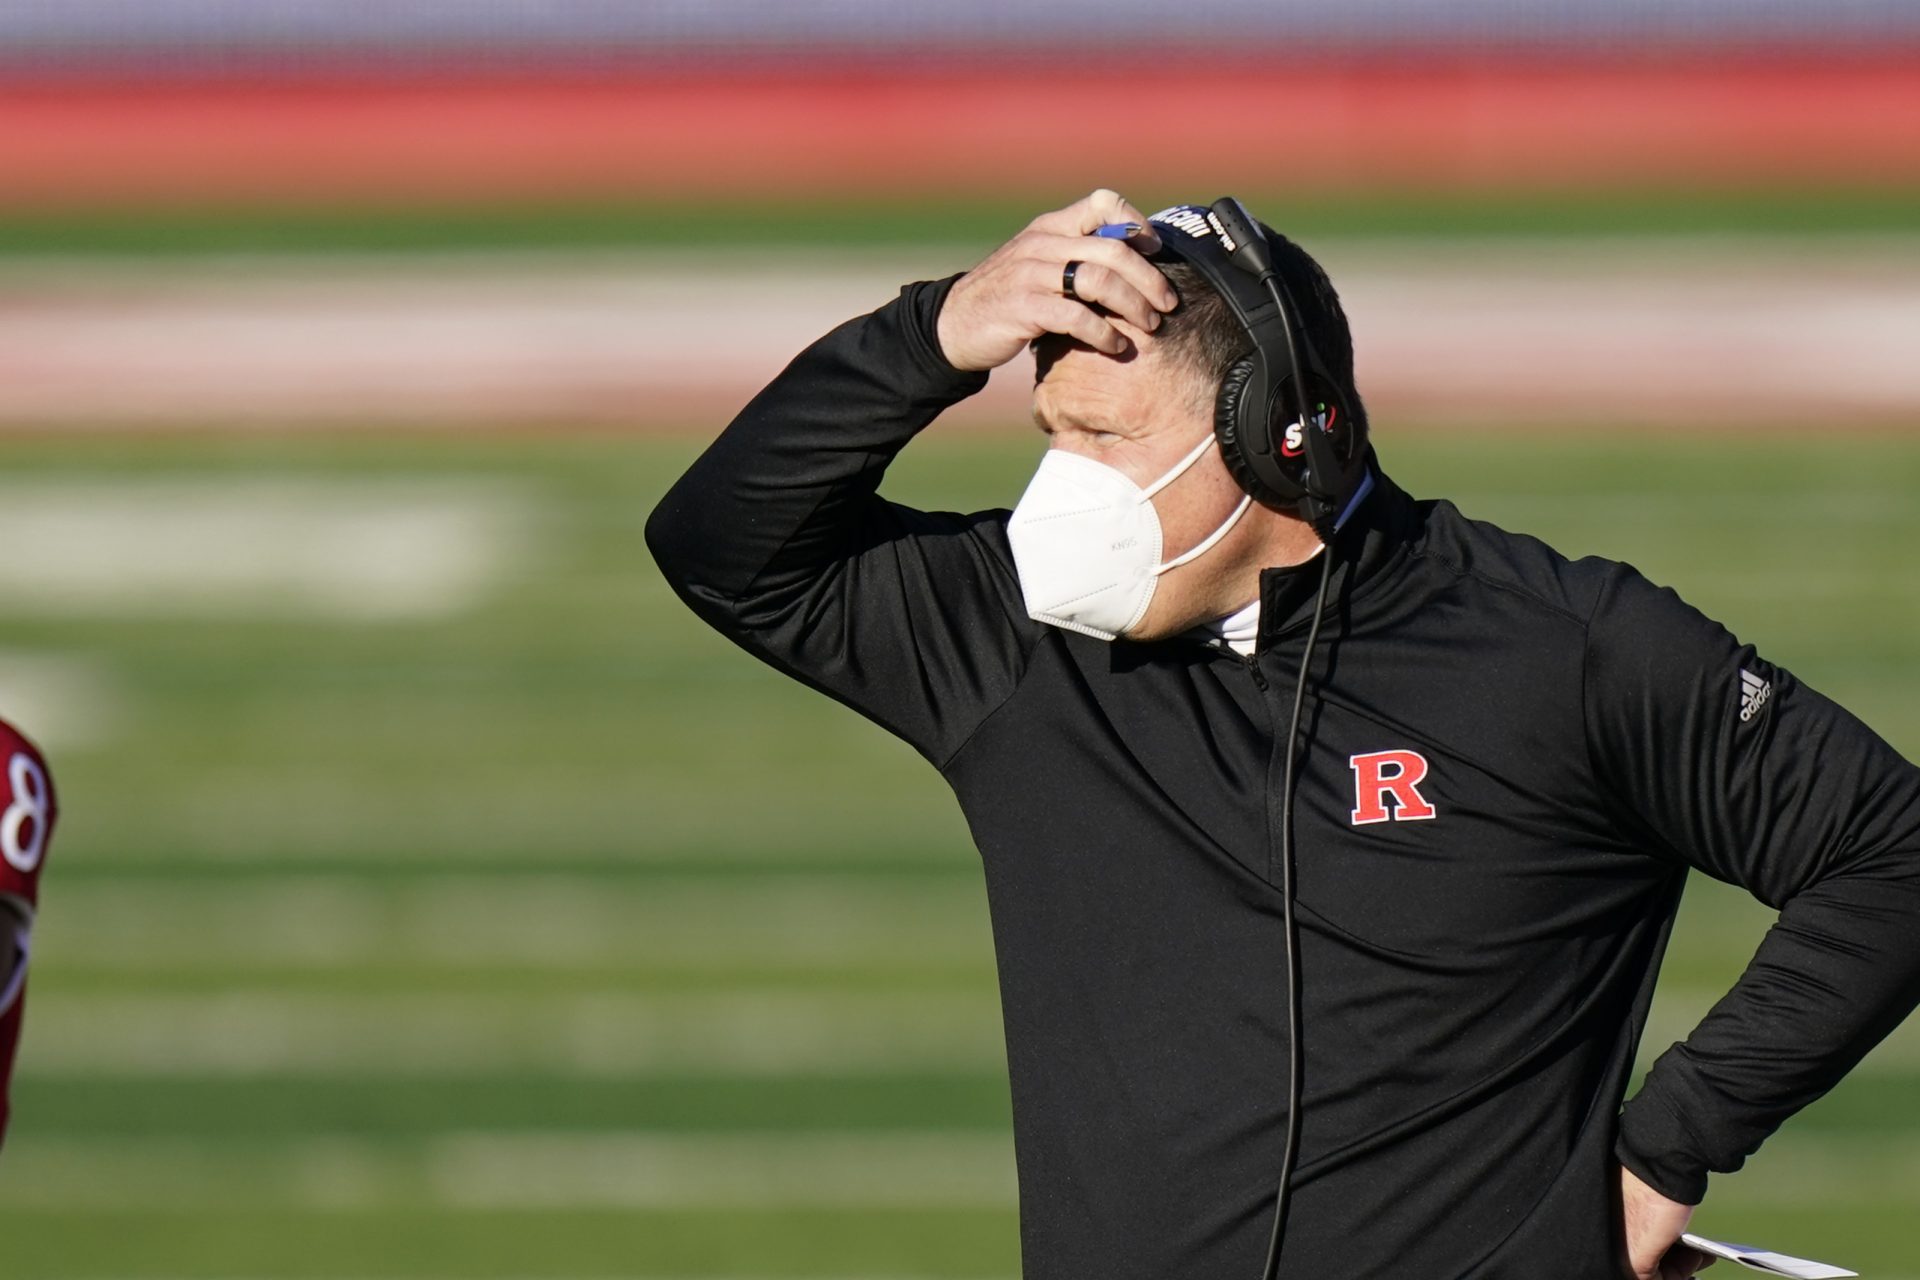 Rutgers head coach Greg Schiano looks on in the first quarter of an NCAA college football game against Indiana, Saturday, Oct. 31, 2020, in Piscataway, N.J.